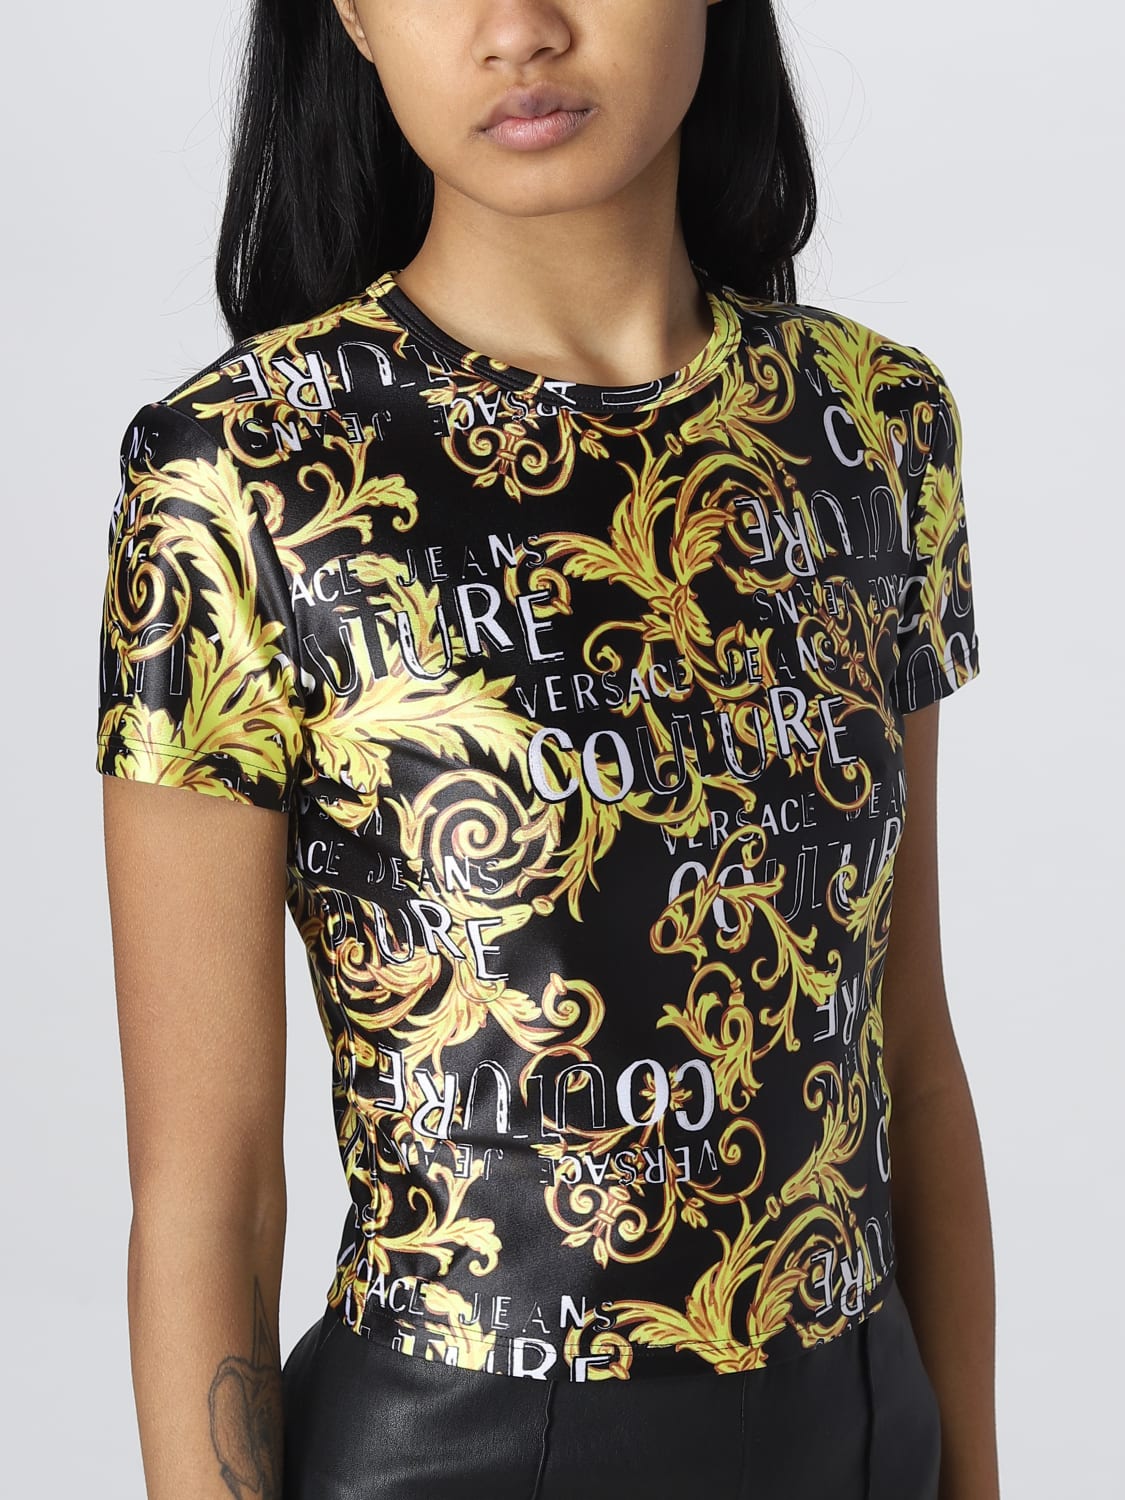 Versace Women's Clothing, Clothes for Women